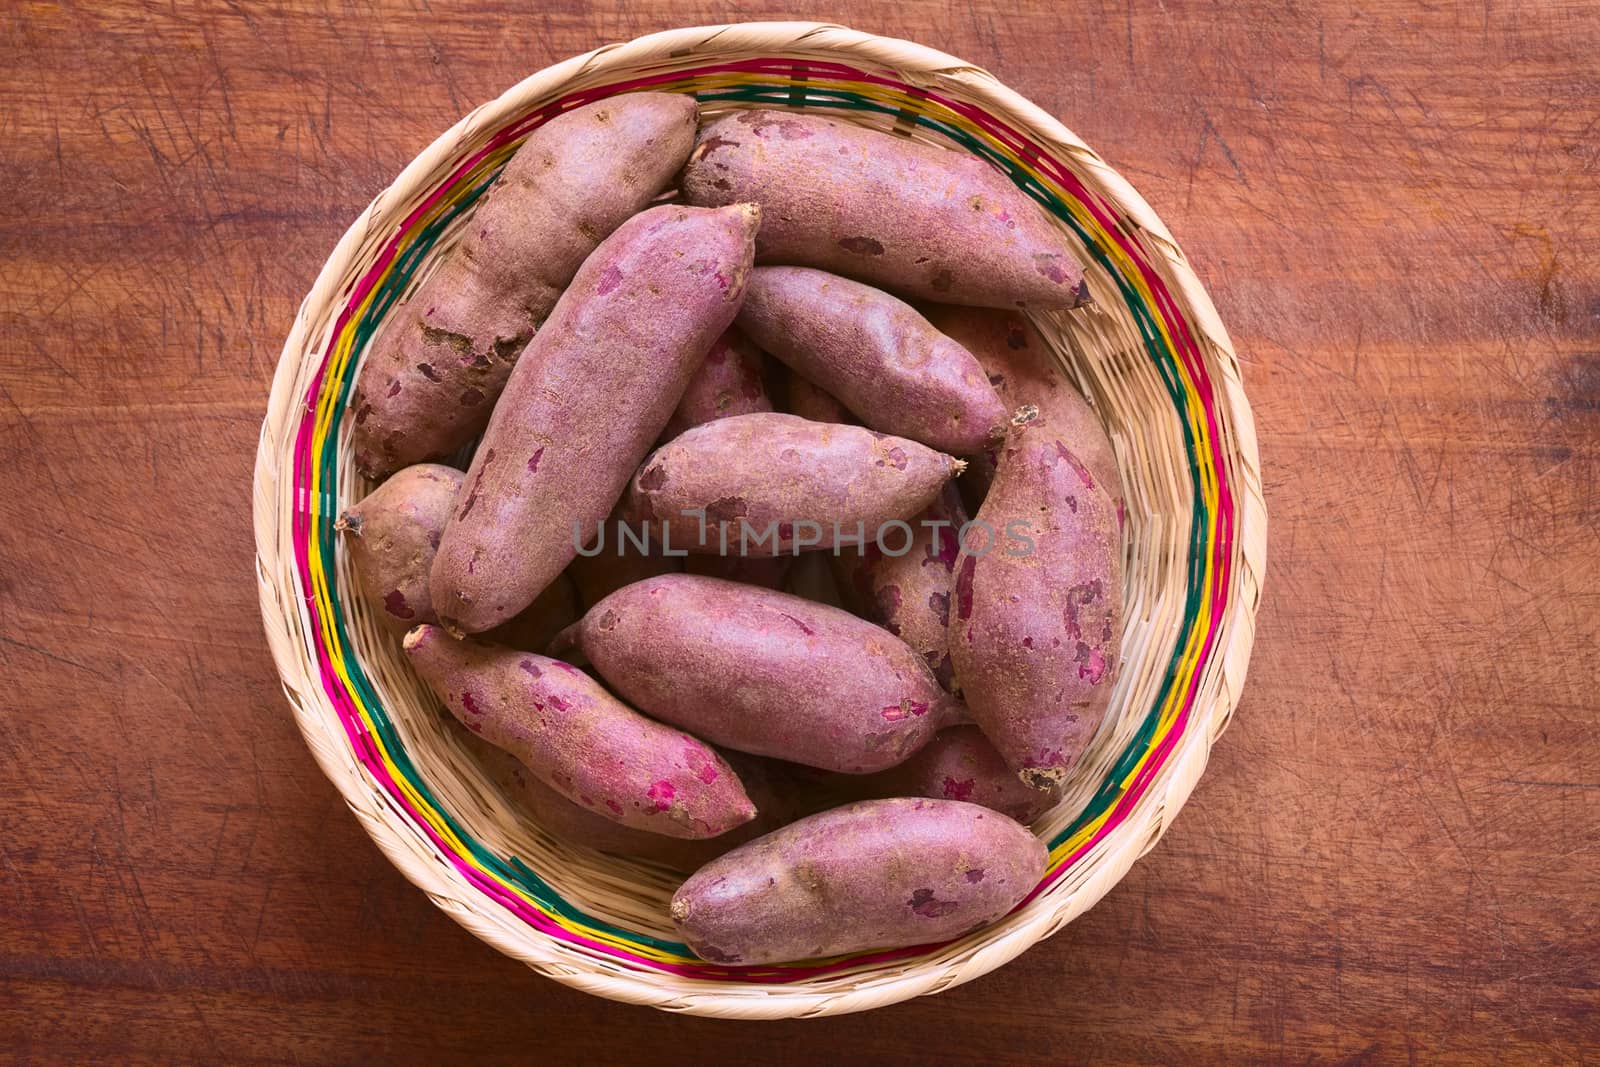 Overhead shot of raw purple sweet potato (lat. Ipomoea batatas) in woven basket on wooden board photographed with natural light   